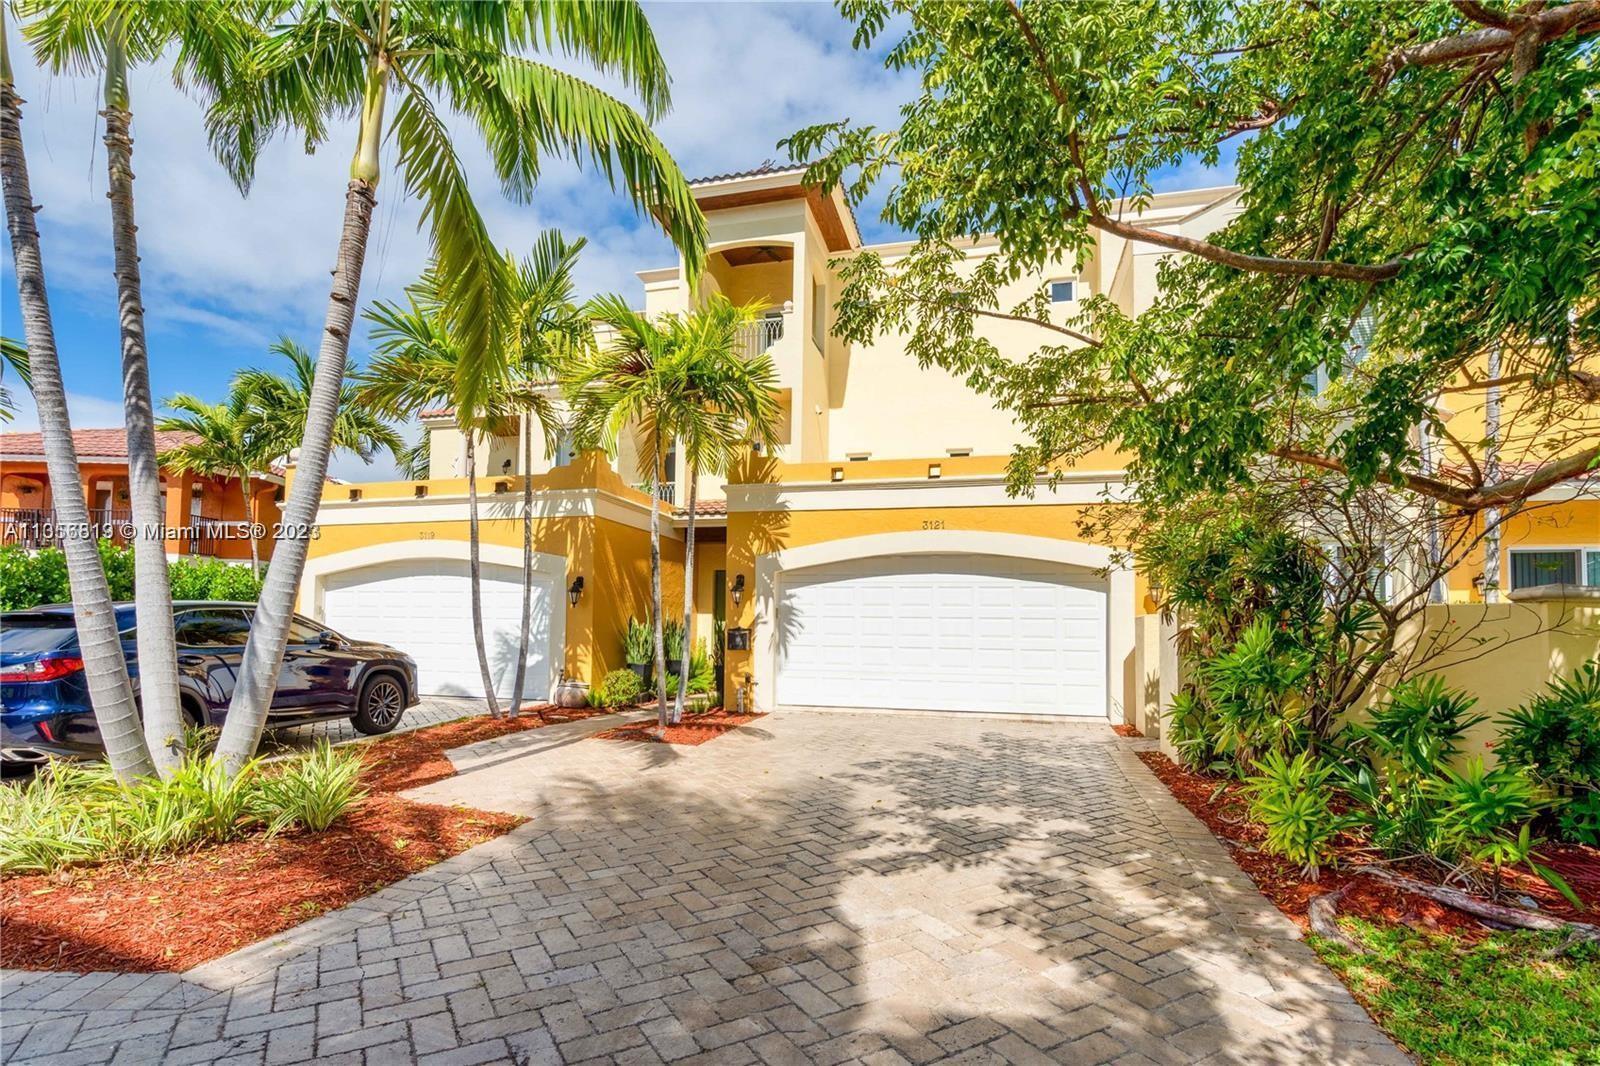 One of a kind townhome in prestigious Dolphin Isles in East Fort Lauderdale. This 3 bedroom, 4 bathr